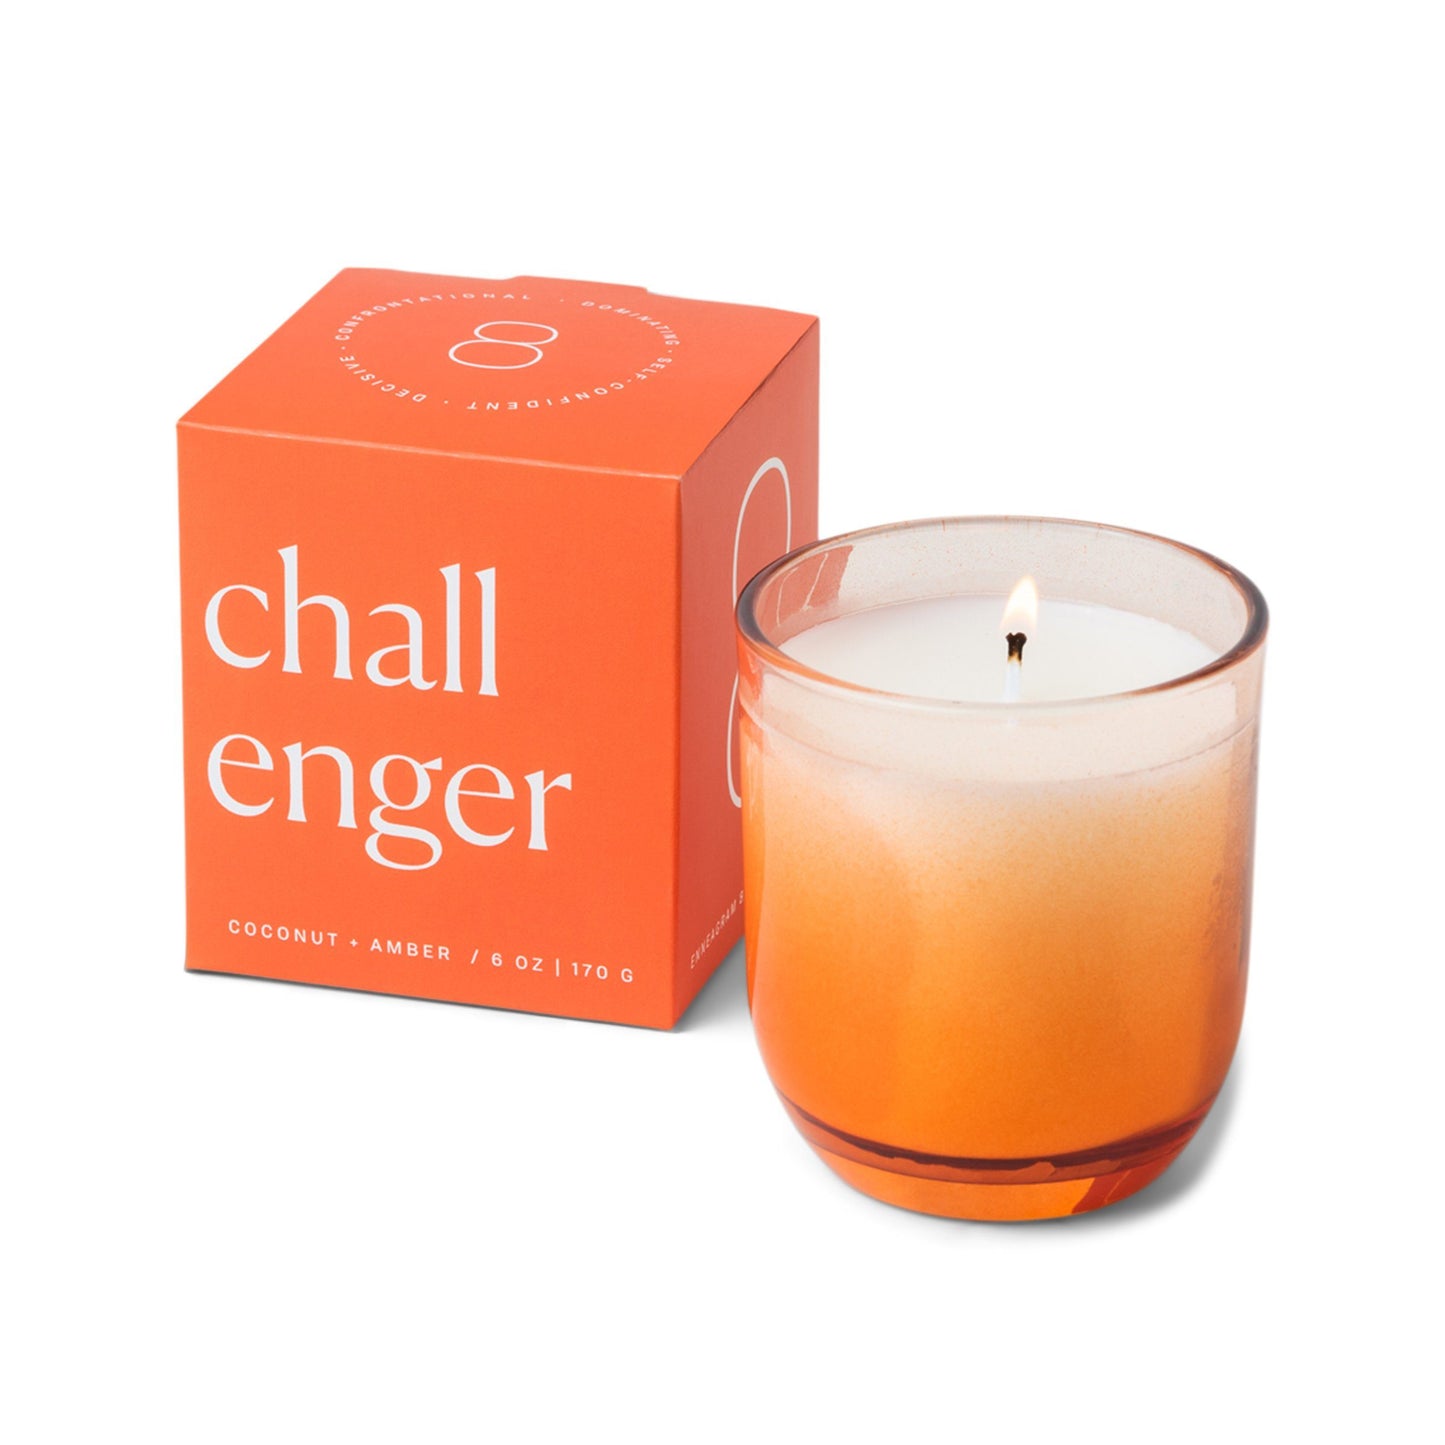 Candle with a vessel of clear glass that fades to orange at the bottom; pictured next to the orange box which reads “challenger”